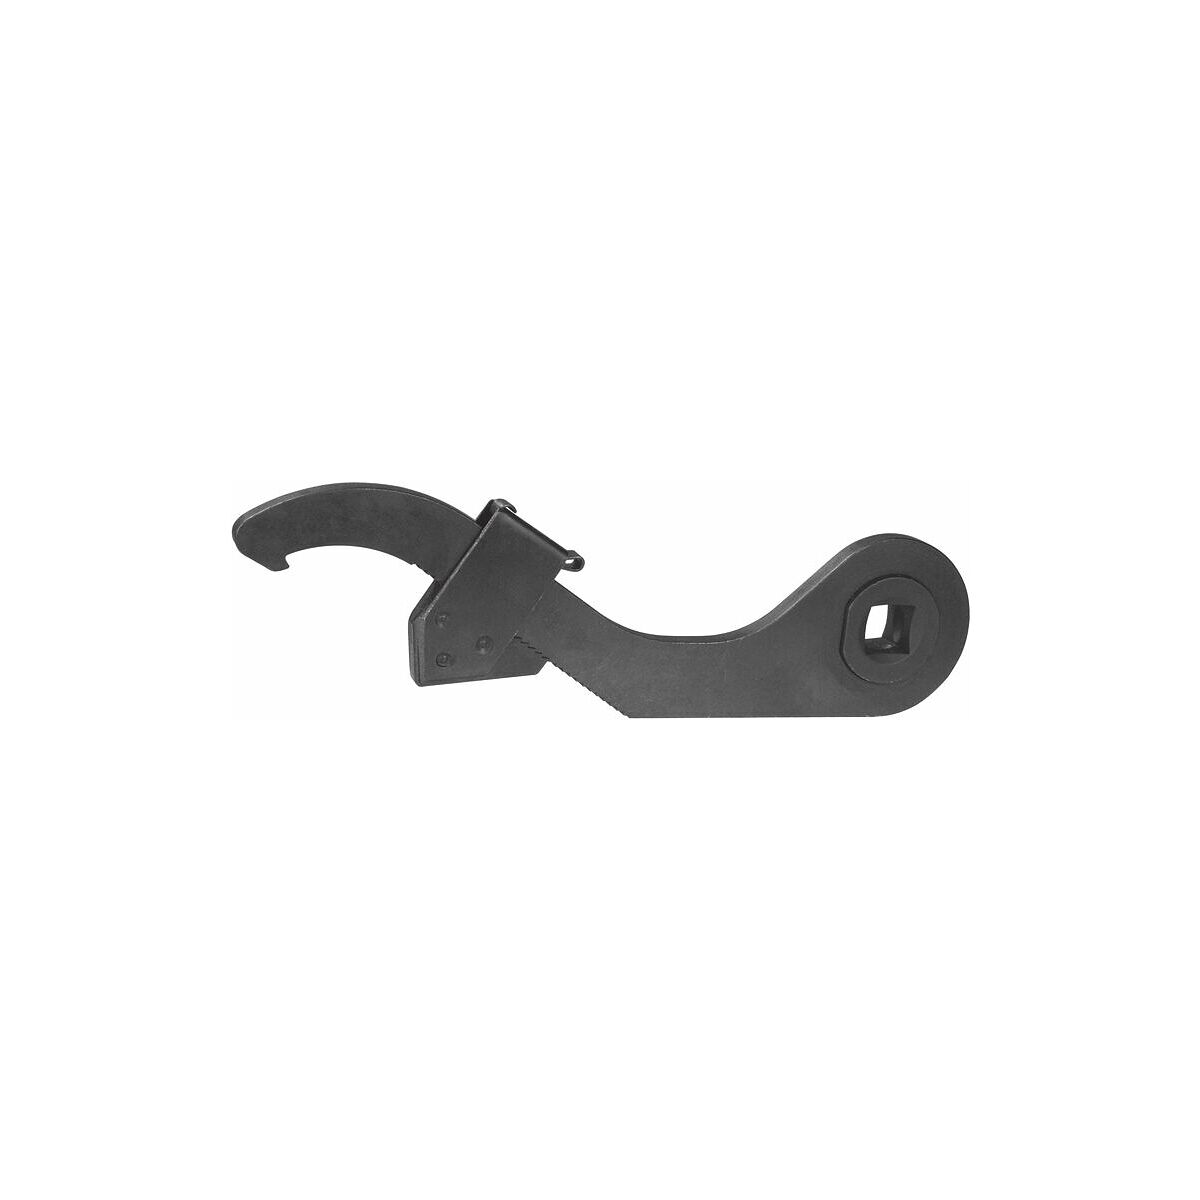 Squibb Taylor 12 Aluminum ACME Spanner Wrench 320305, J Wrench, Squibb  Taylor, New